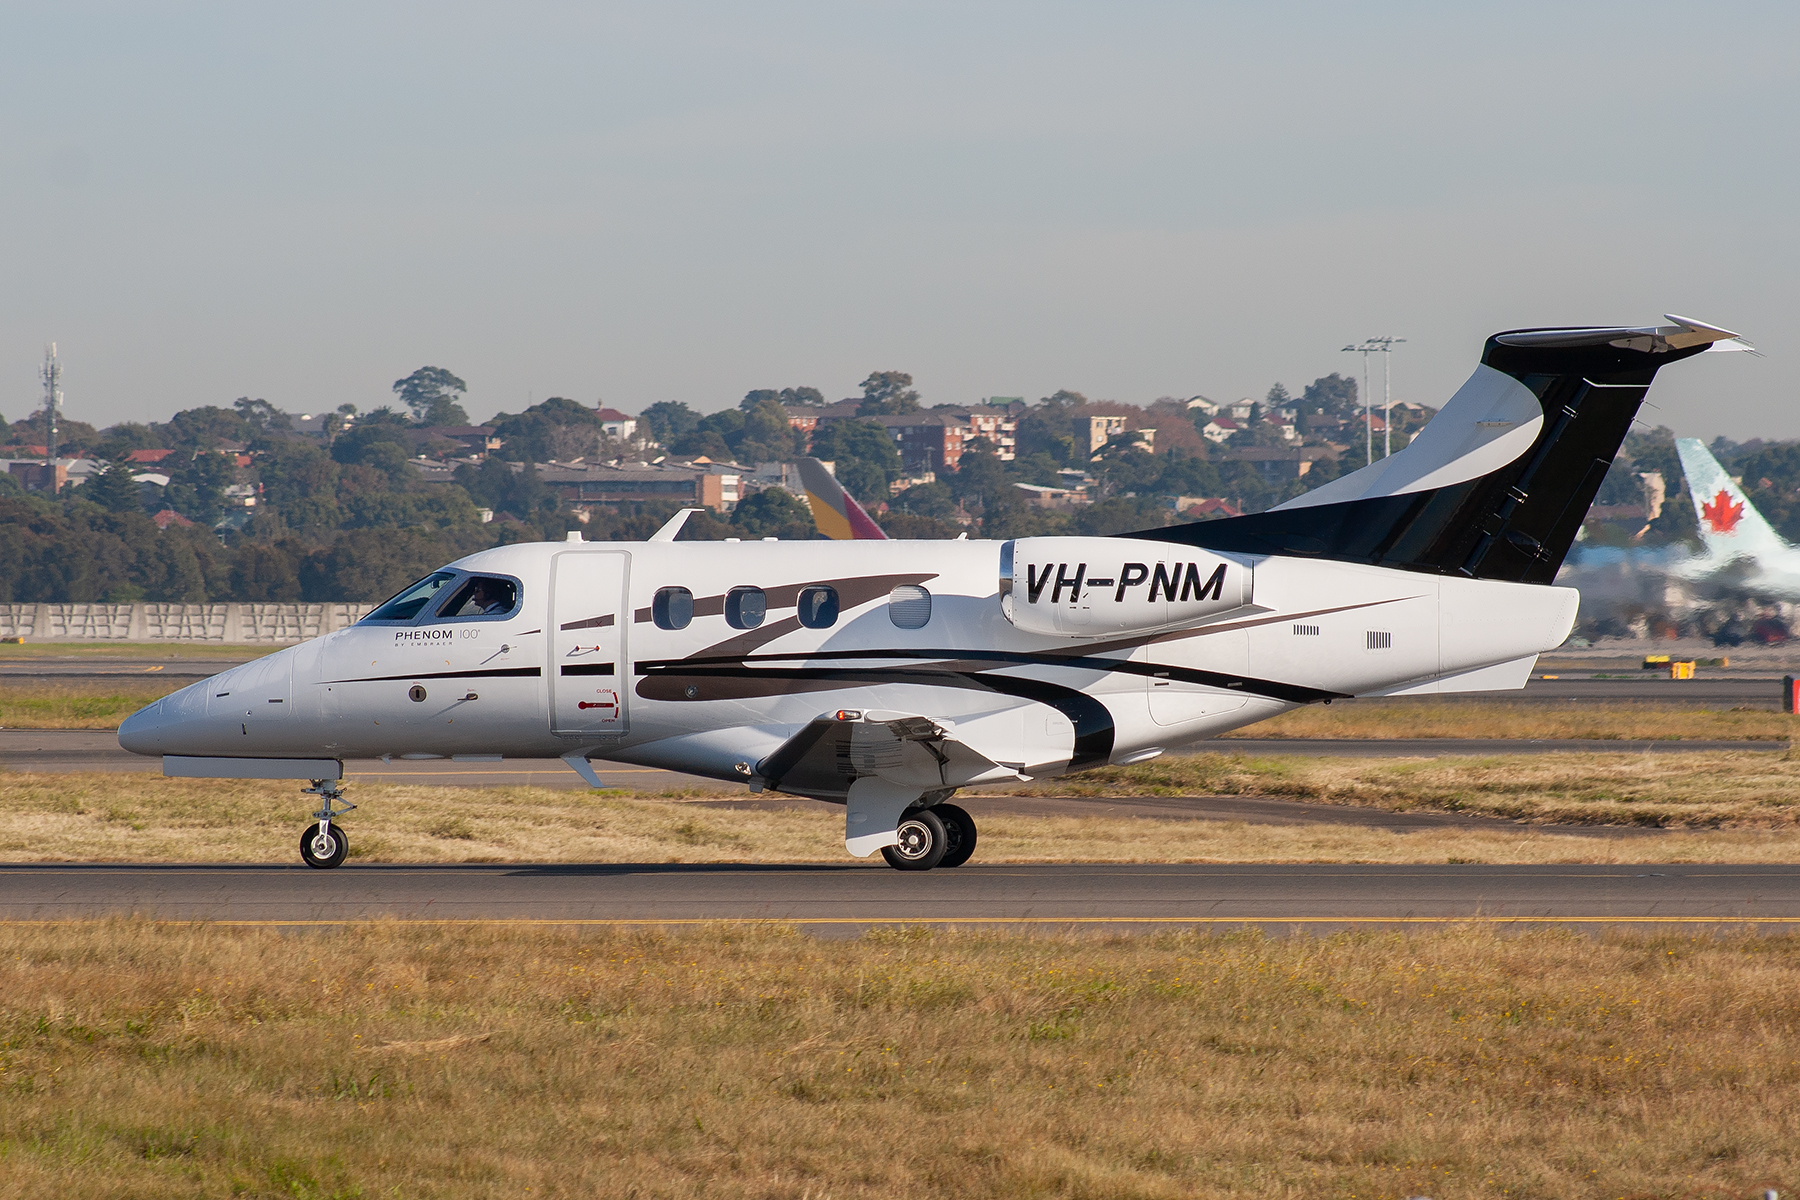 GoJet (Pty) Embraer Embraer Phenom 100 VH-PNM at Kingsford Smith